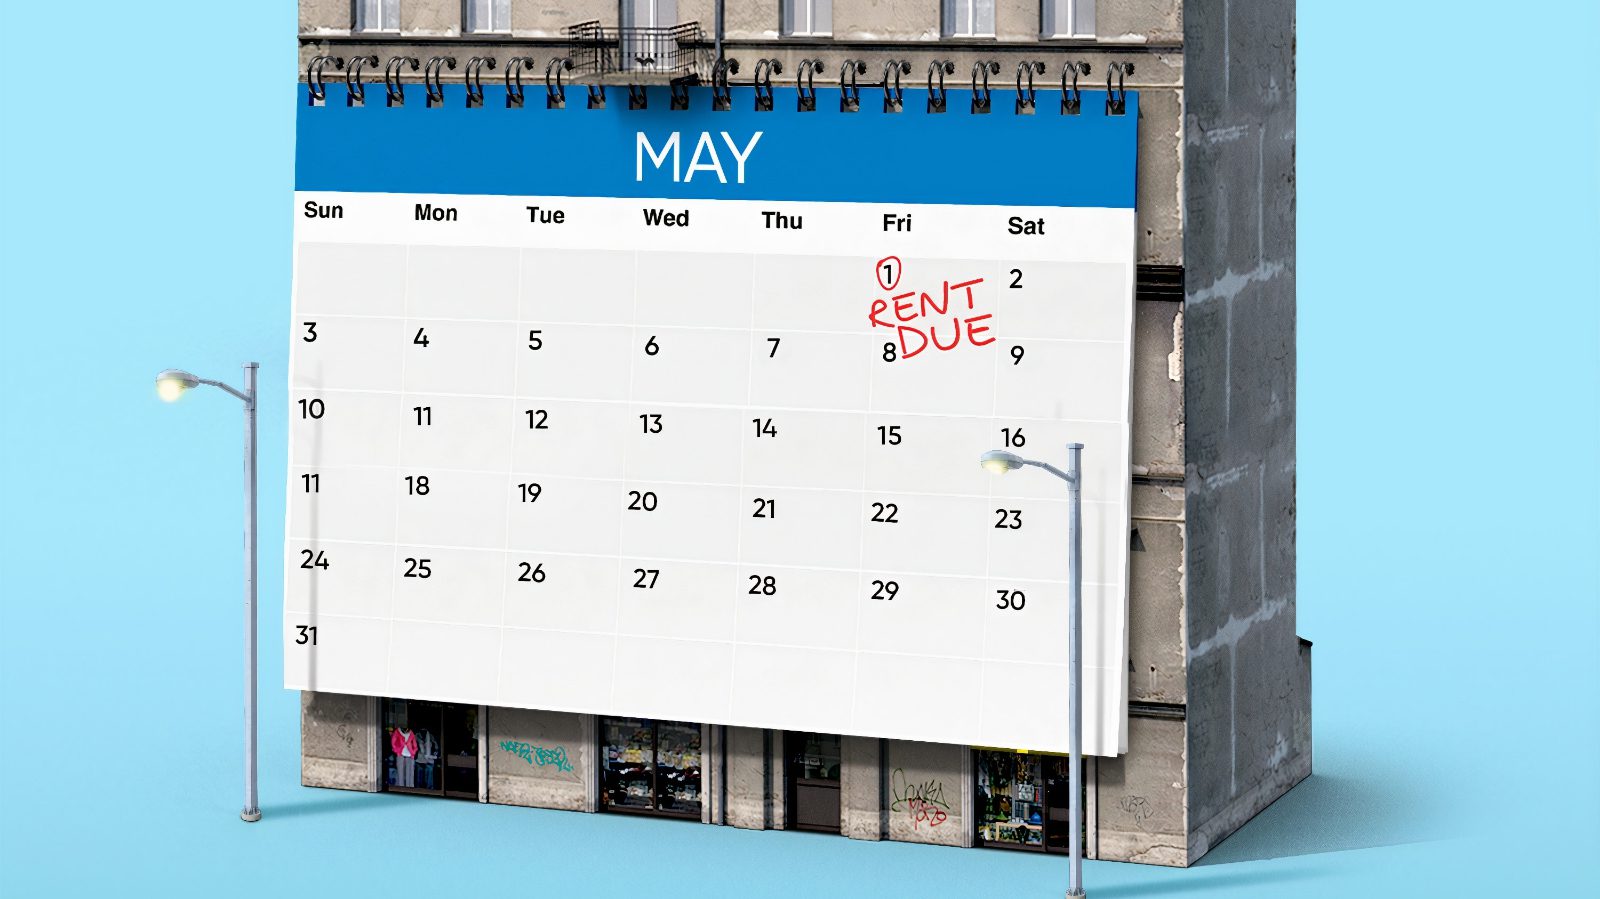 How Much Should You Spend on Rent?